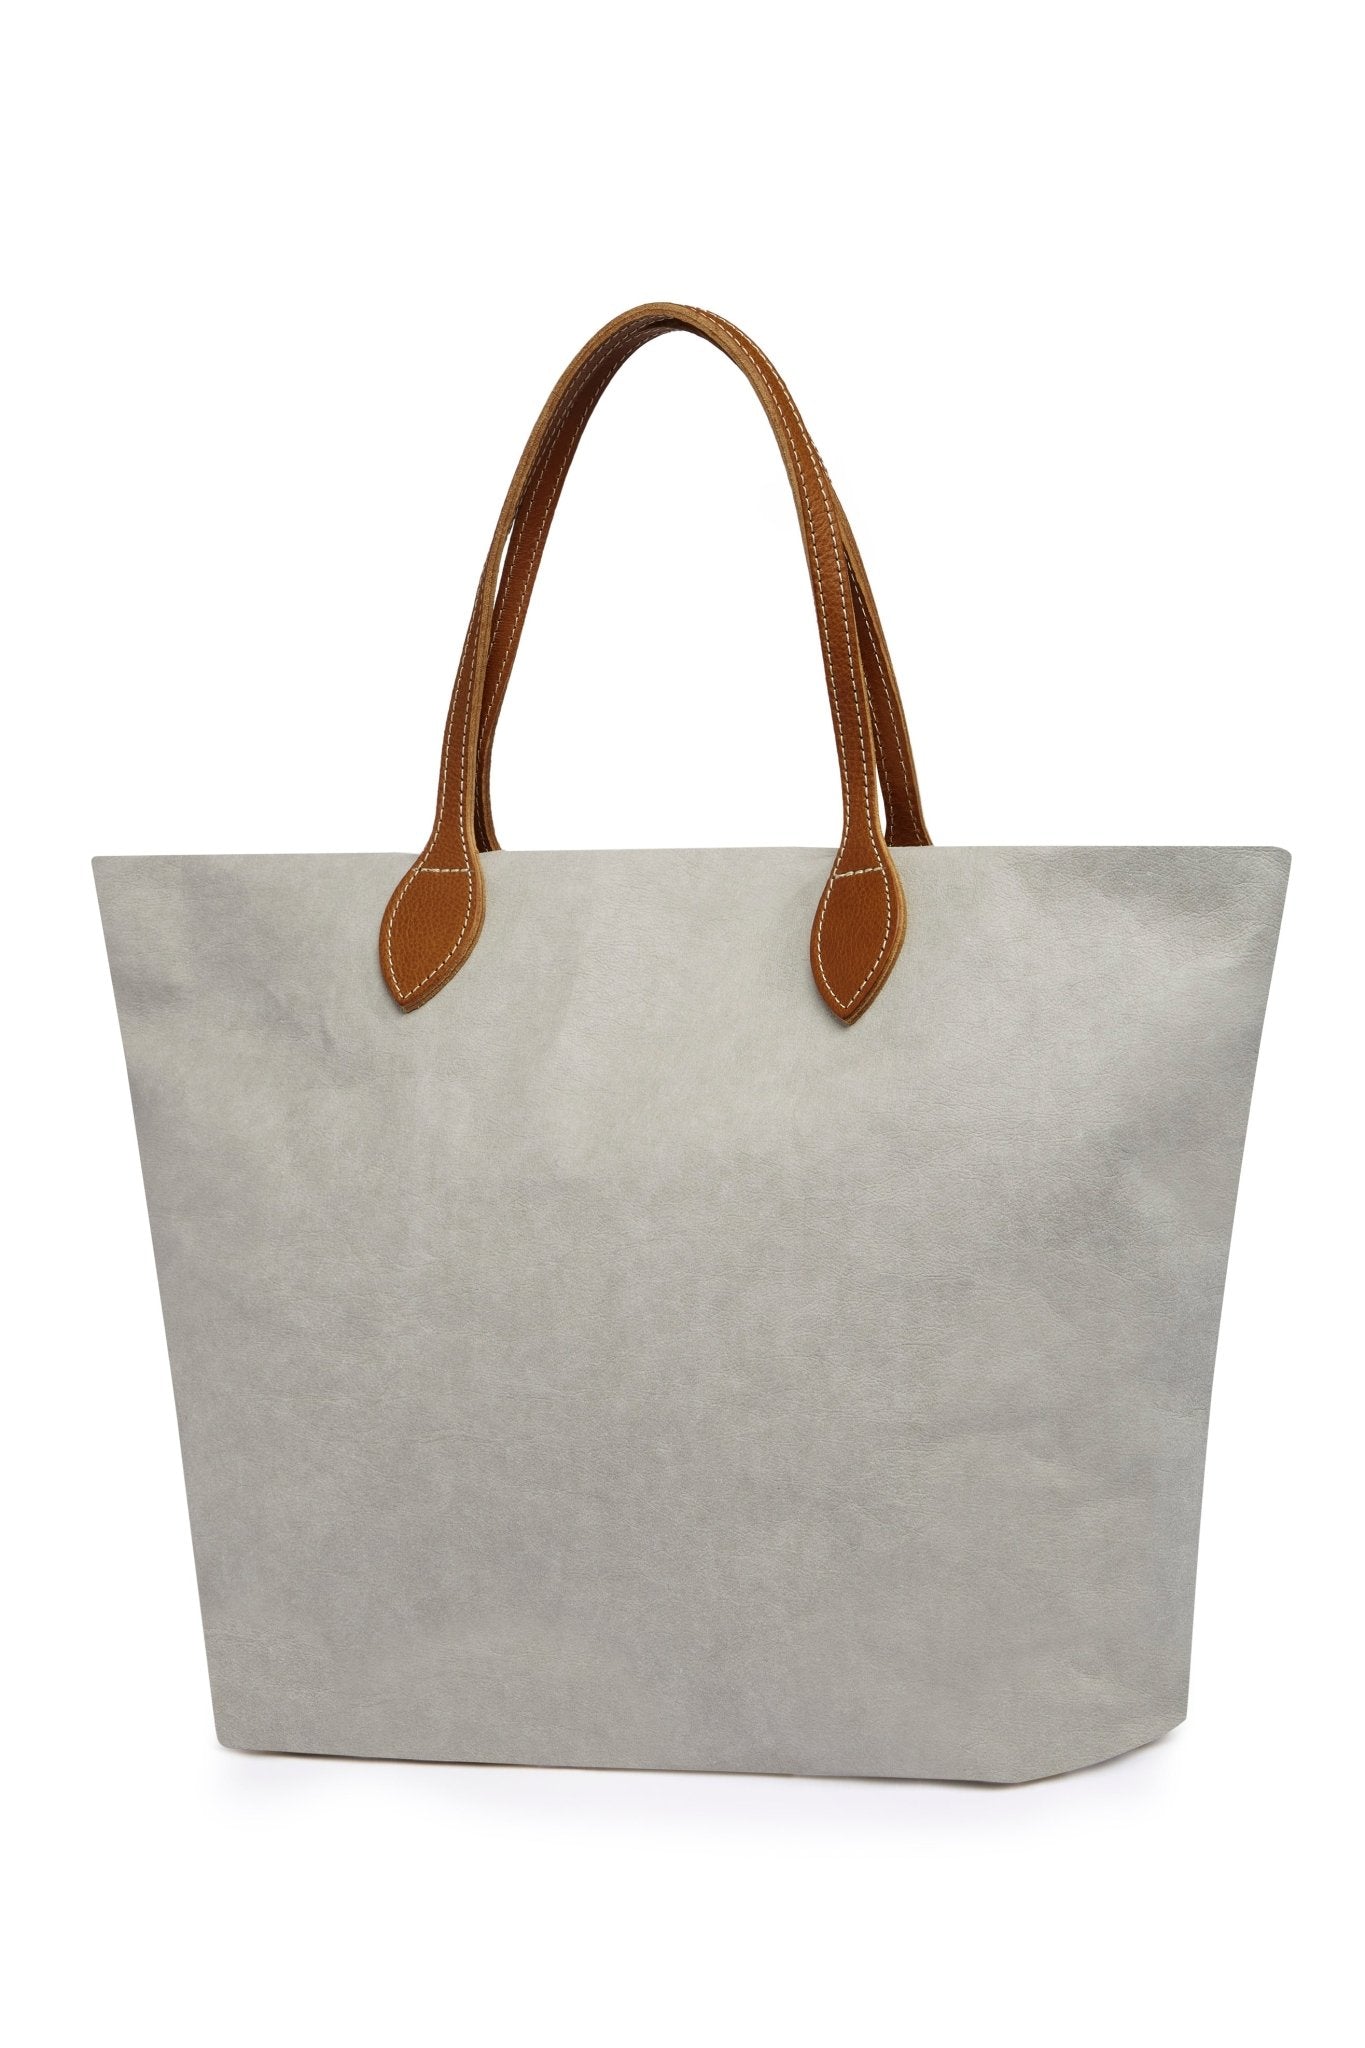 A large washable paper tote is shown. It has two long tan leather handles. The bag shown is pale grey with tan handles.